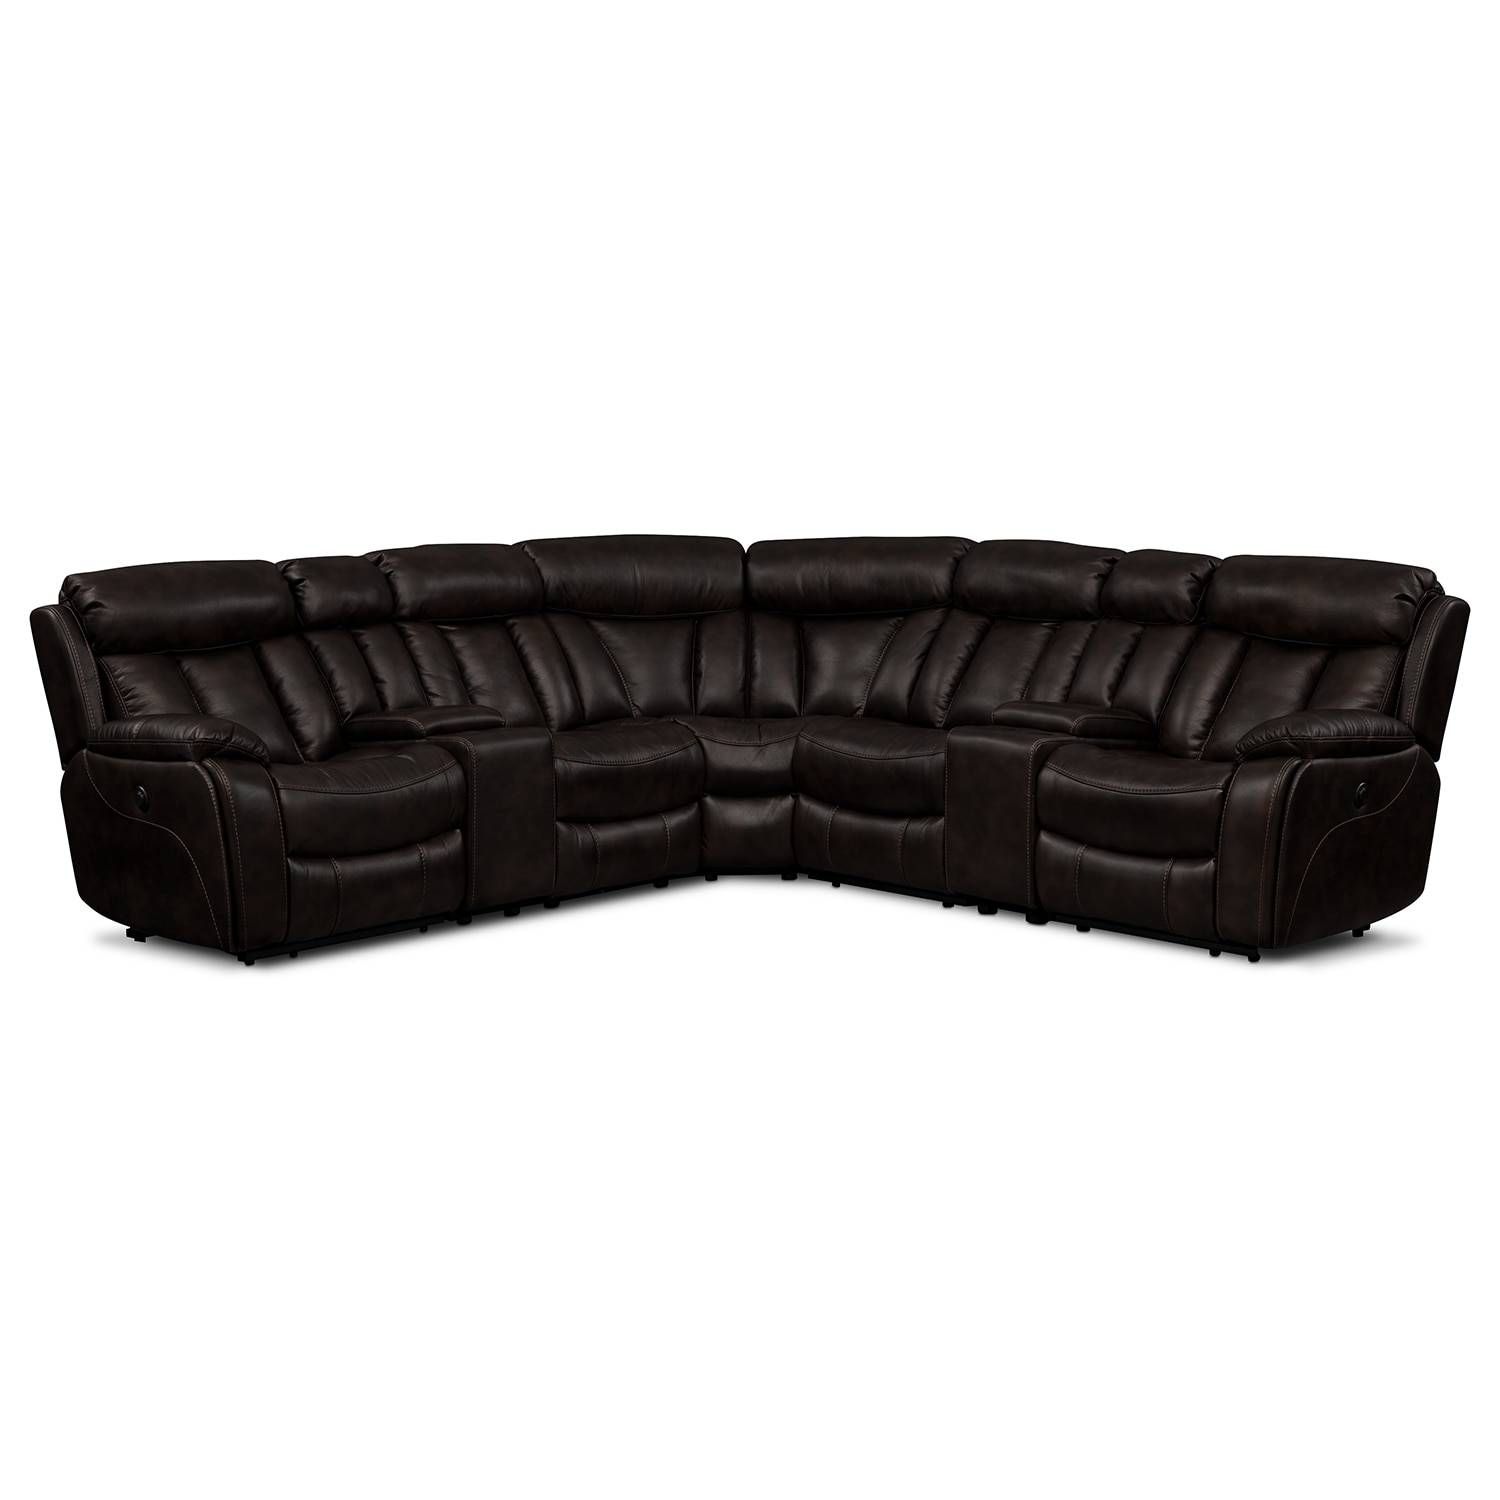 Sectional Sofas | Value City Furniture | Value City Furniture For Sectional Sofas Under  (View 20 of 30)